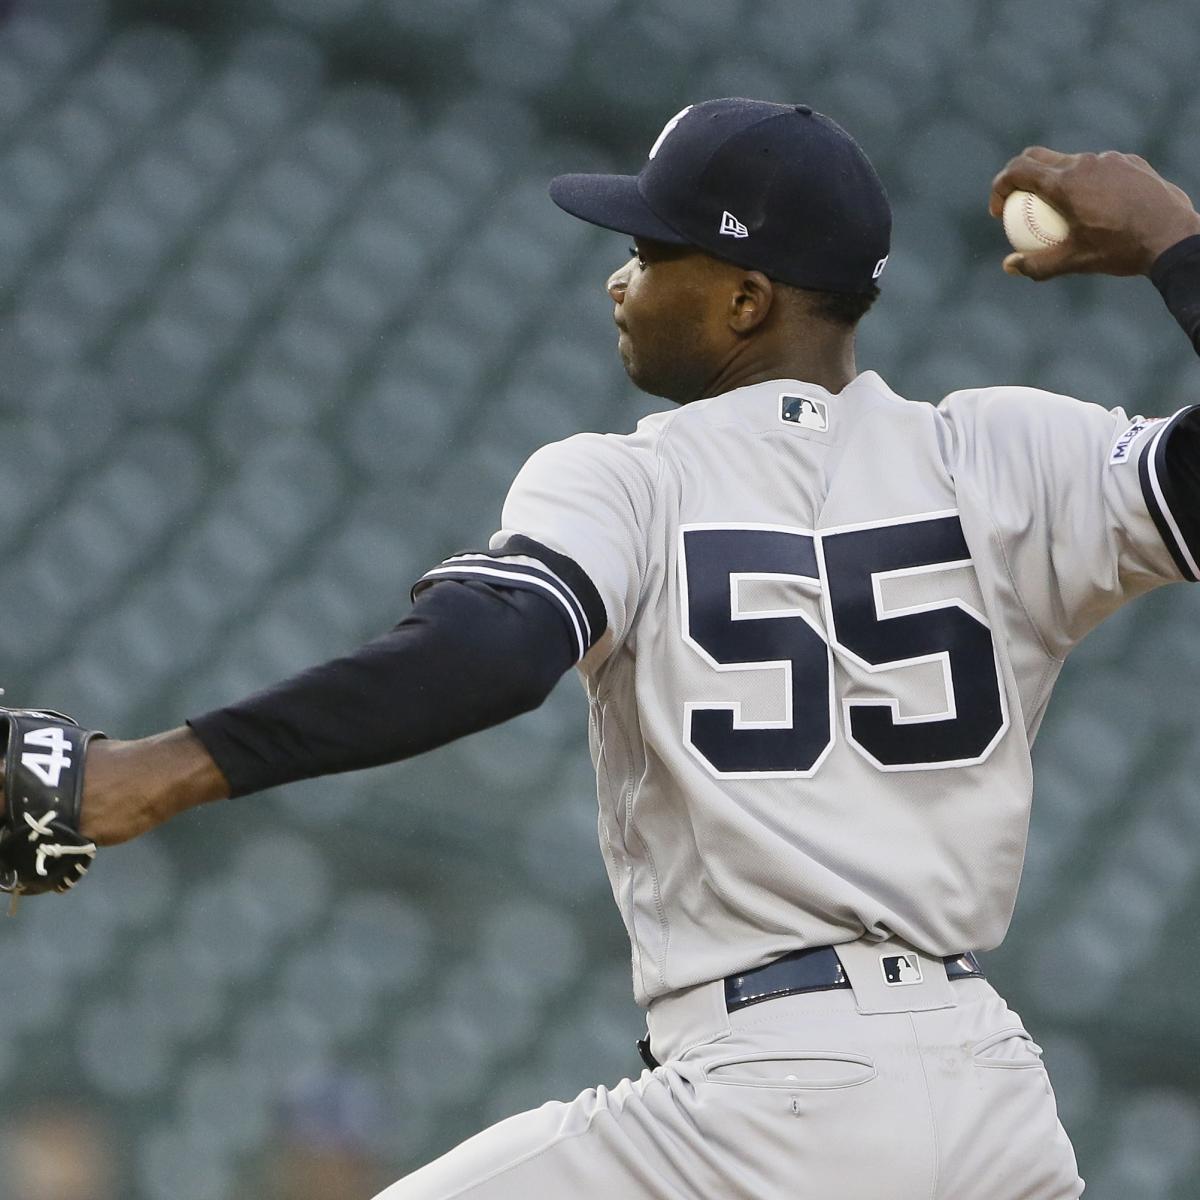 Yankees' Pitching Problems Intensify As Domingo German Goes To Rehab